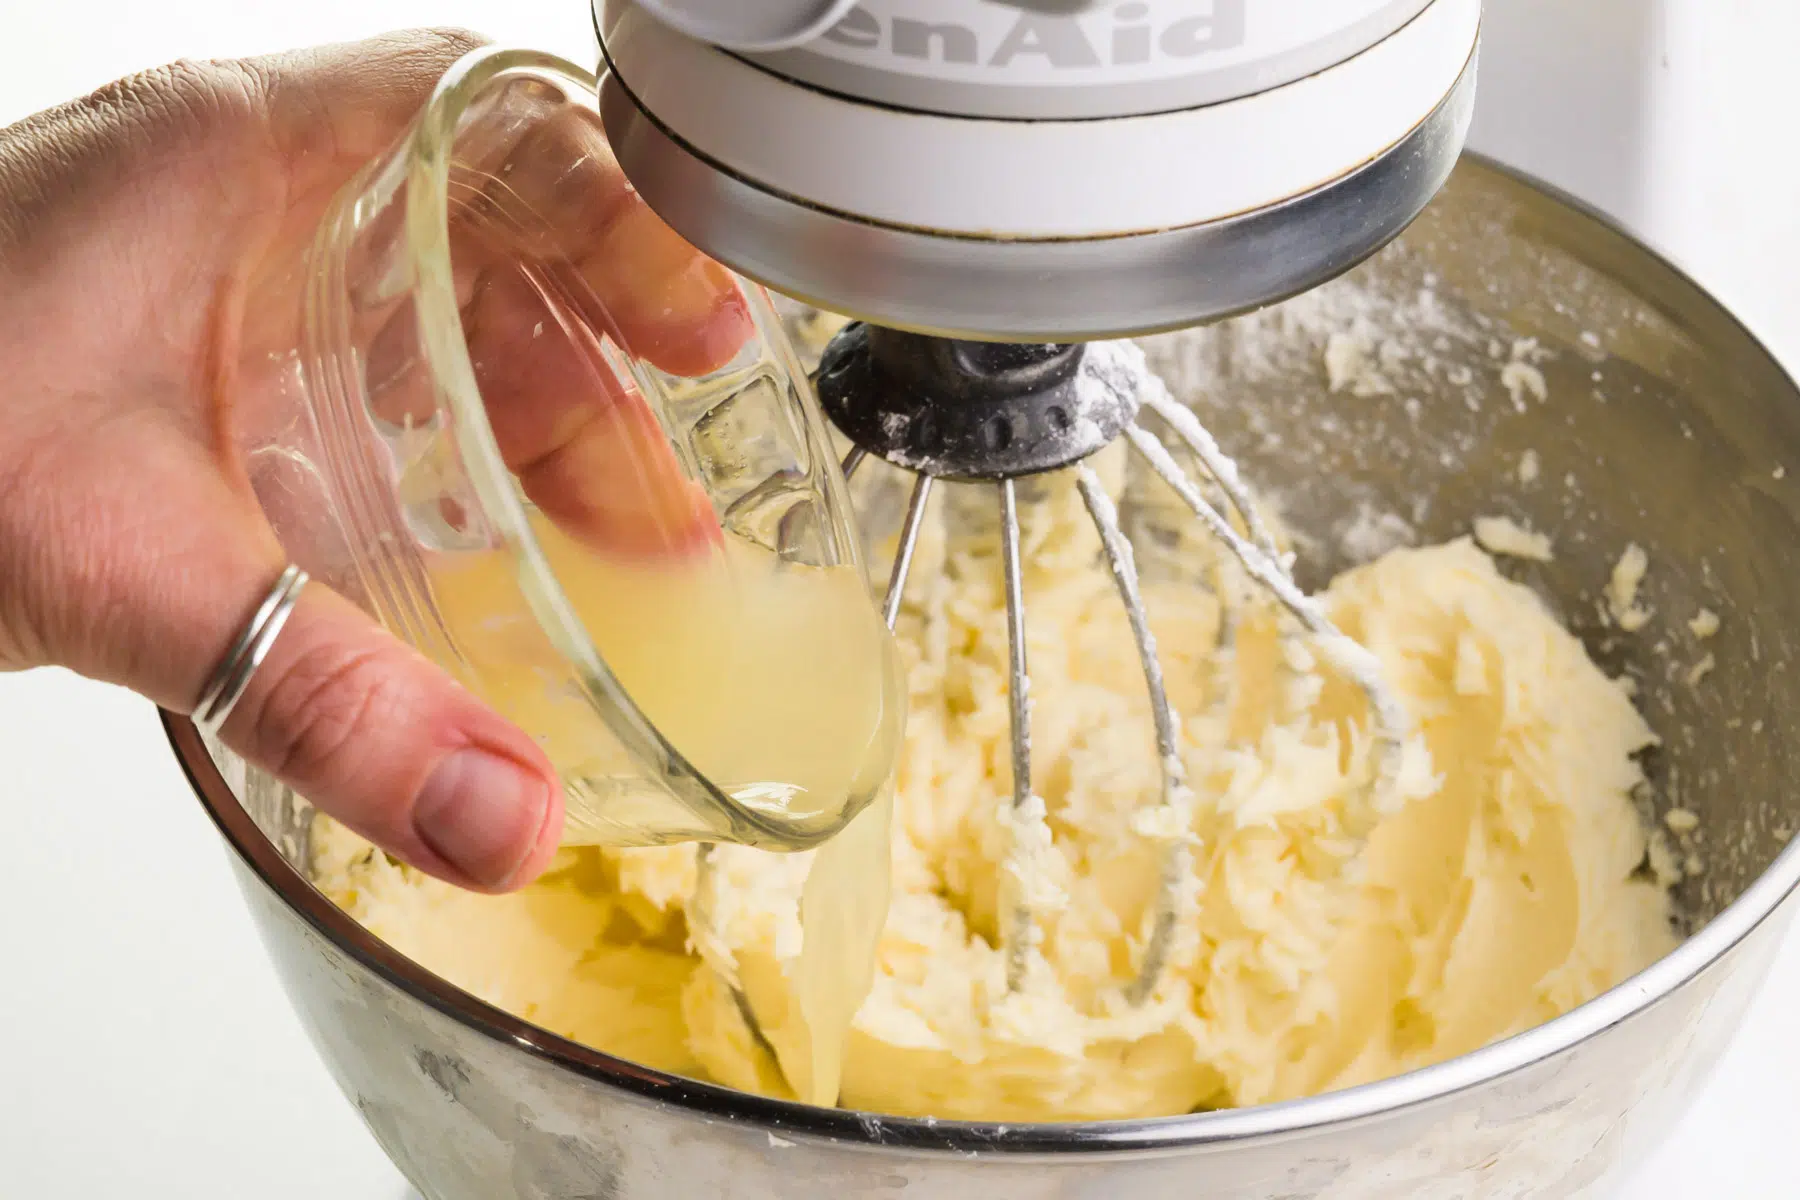 A hand holds a bowl of lemon juice, pouring it into the bowl of a stand mixer with whipped butter.